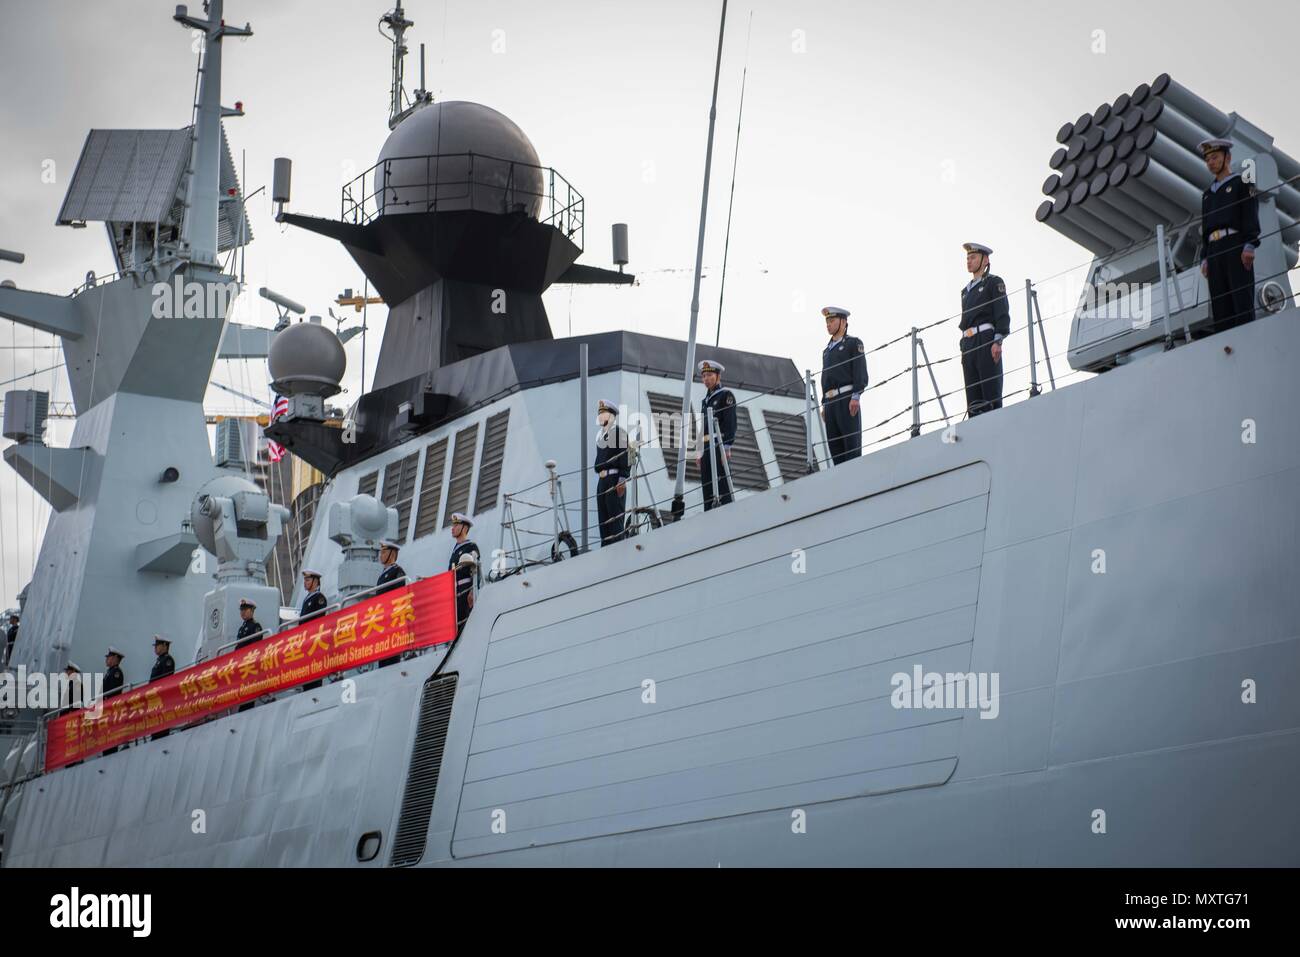 161206-N-VN584-397 SAN DIEGO (Dec. 6, 2016) Chinese sailors on the Jiangkai II-class frigate Yancheng (FFG 546) man the rails as they arrive in San Diego. Rear Adm. Jay Bynum, commander of Carrier Strike Group Nine, is hosting three People’s Liberation Army ships during a routine port visit in San Diego.  (U.S. Navy photo by Seaman Alex Corona/Released) Stock Photo